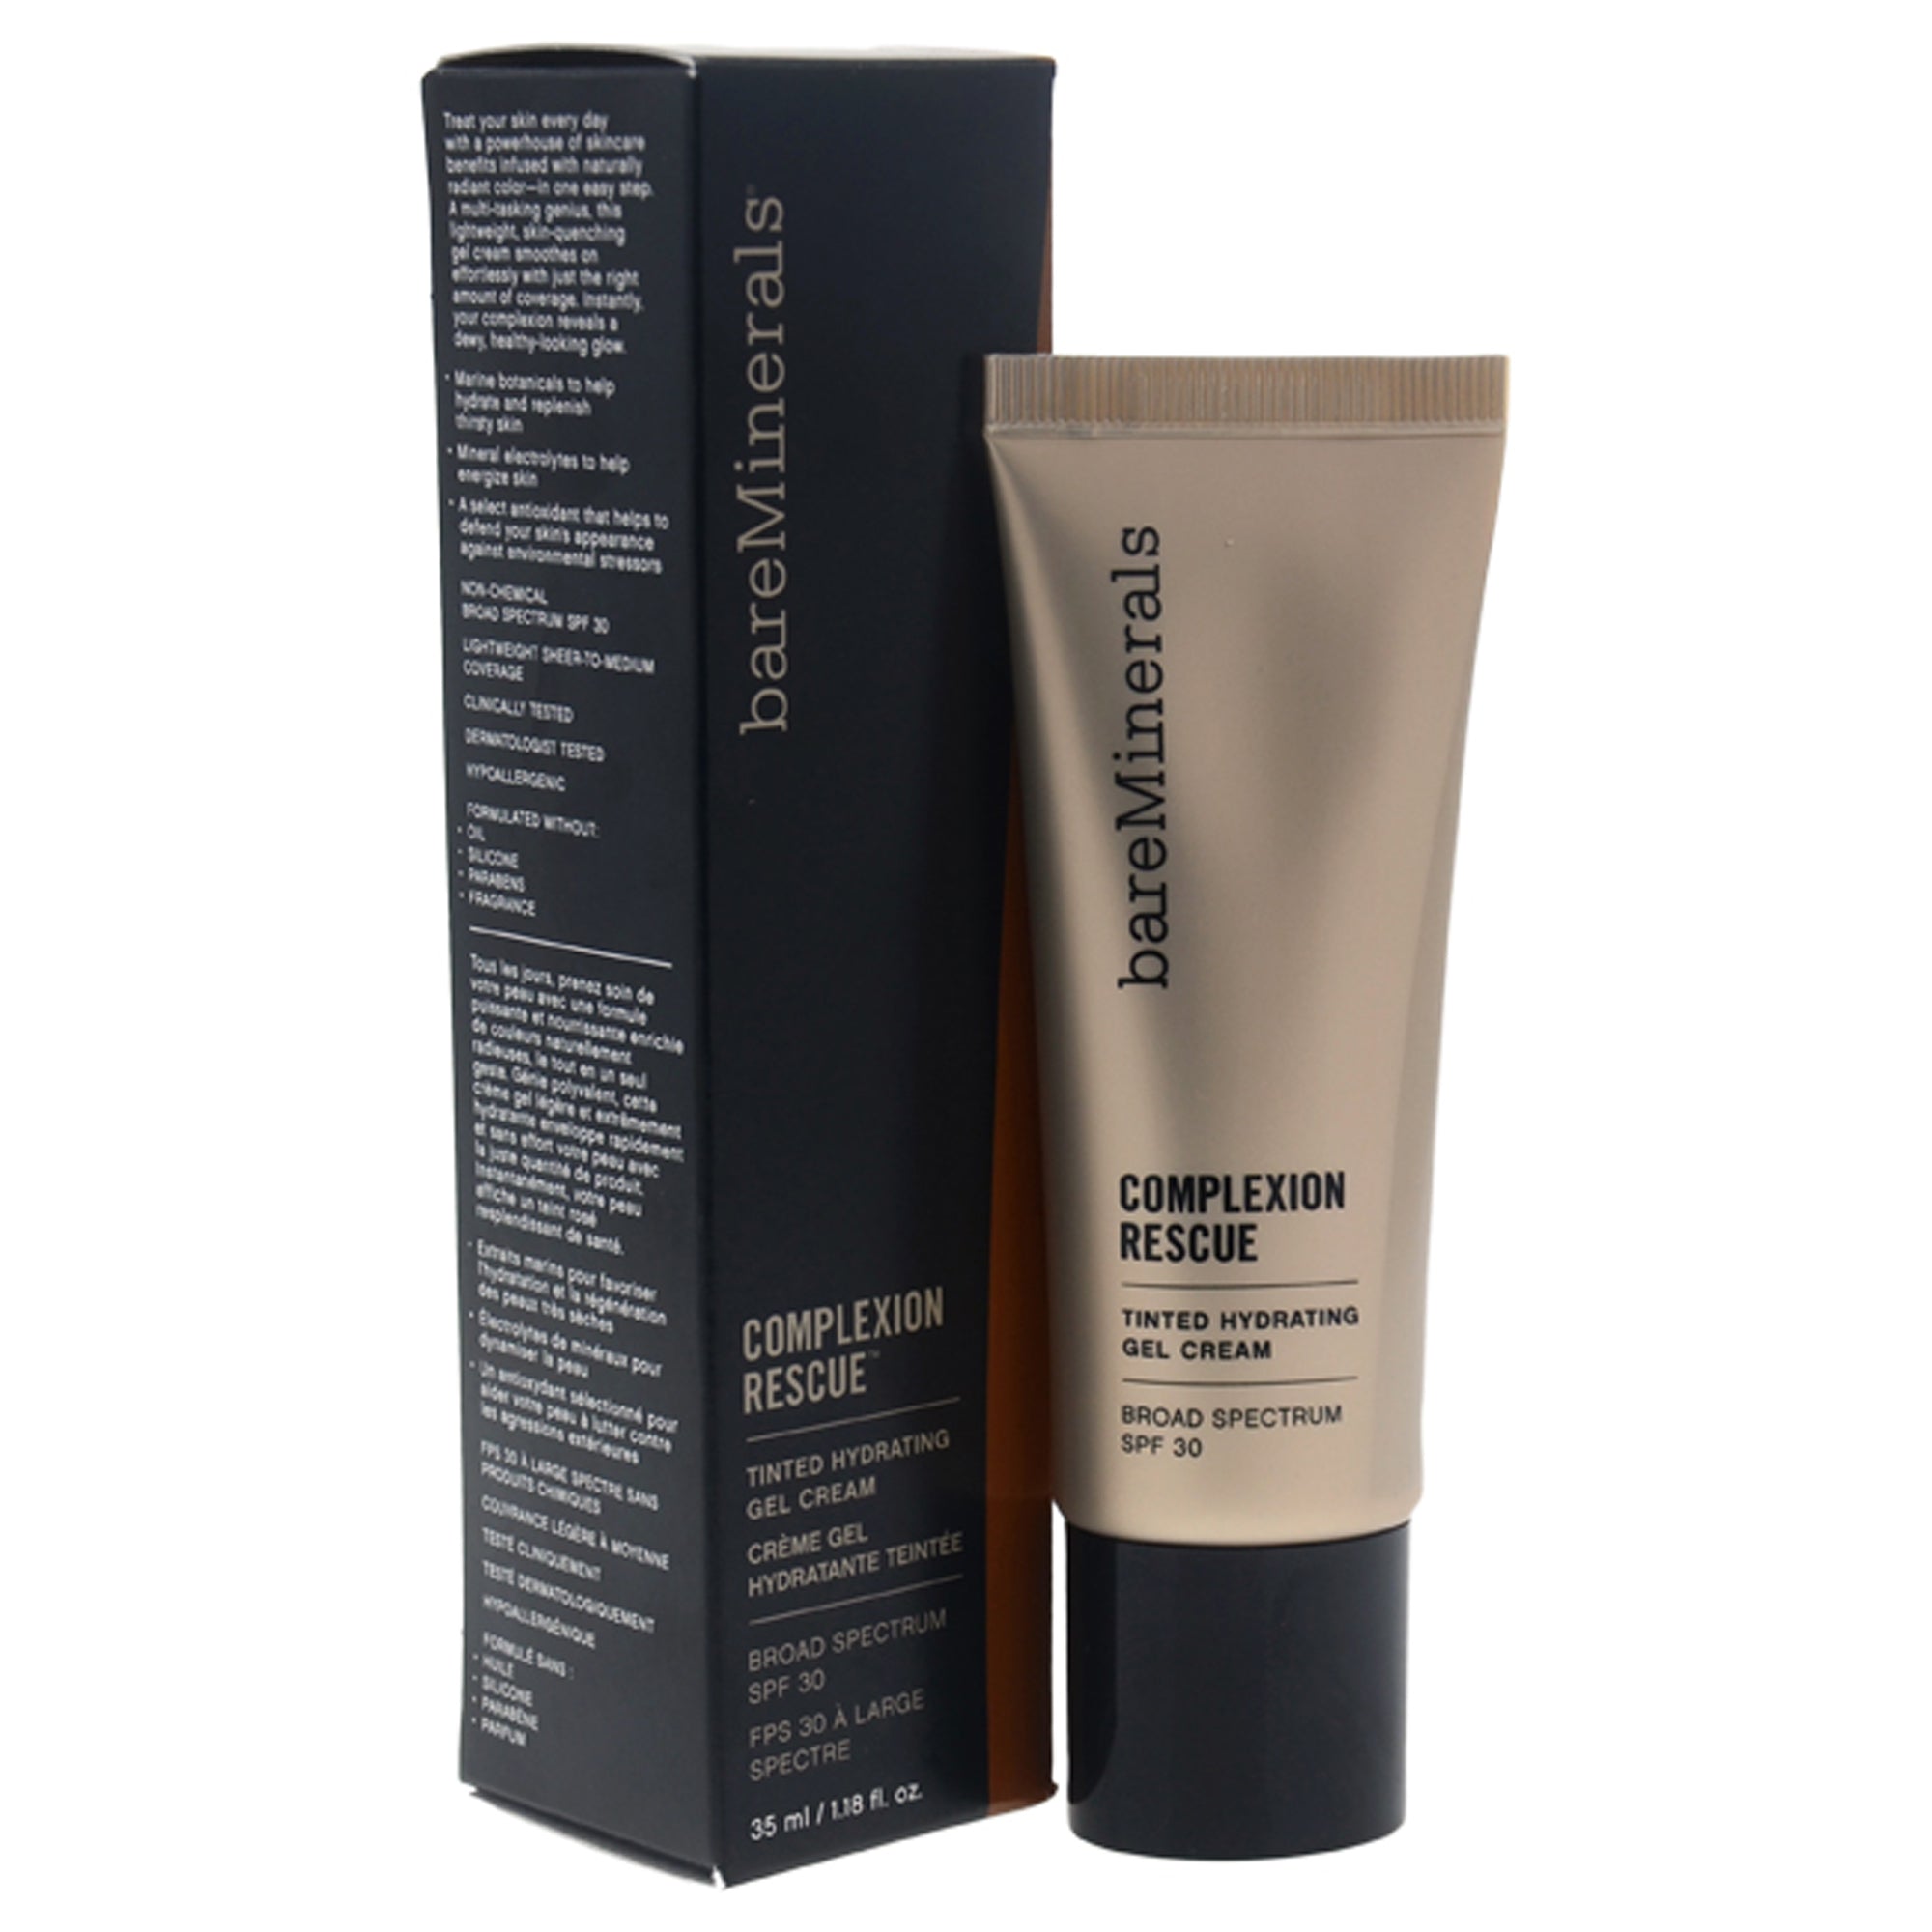 Complexion Rescue Tinted Hydrating Gel Cream SPF 30 - 09 Chestnut by bareMinerals for Women - 1.18 oz Foundation Small